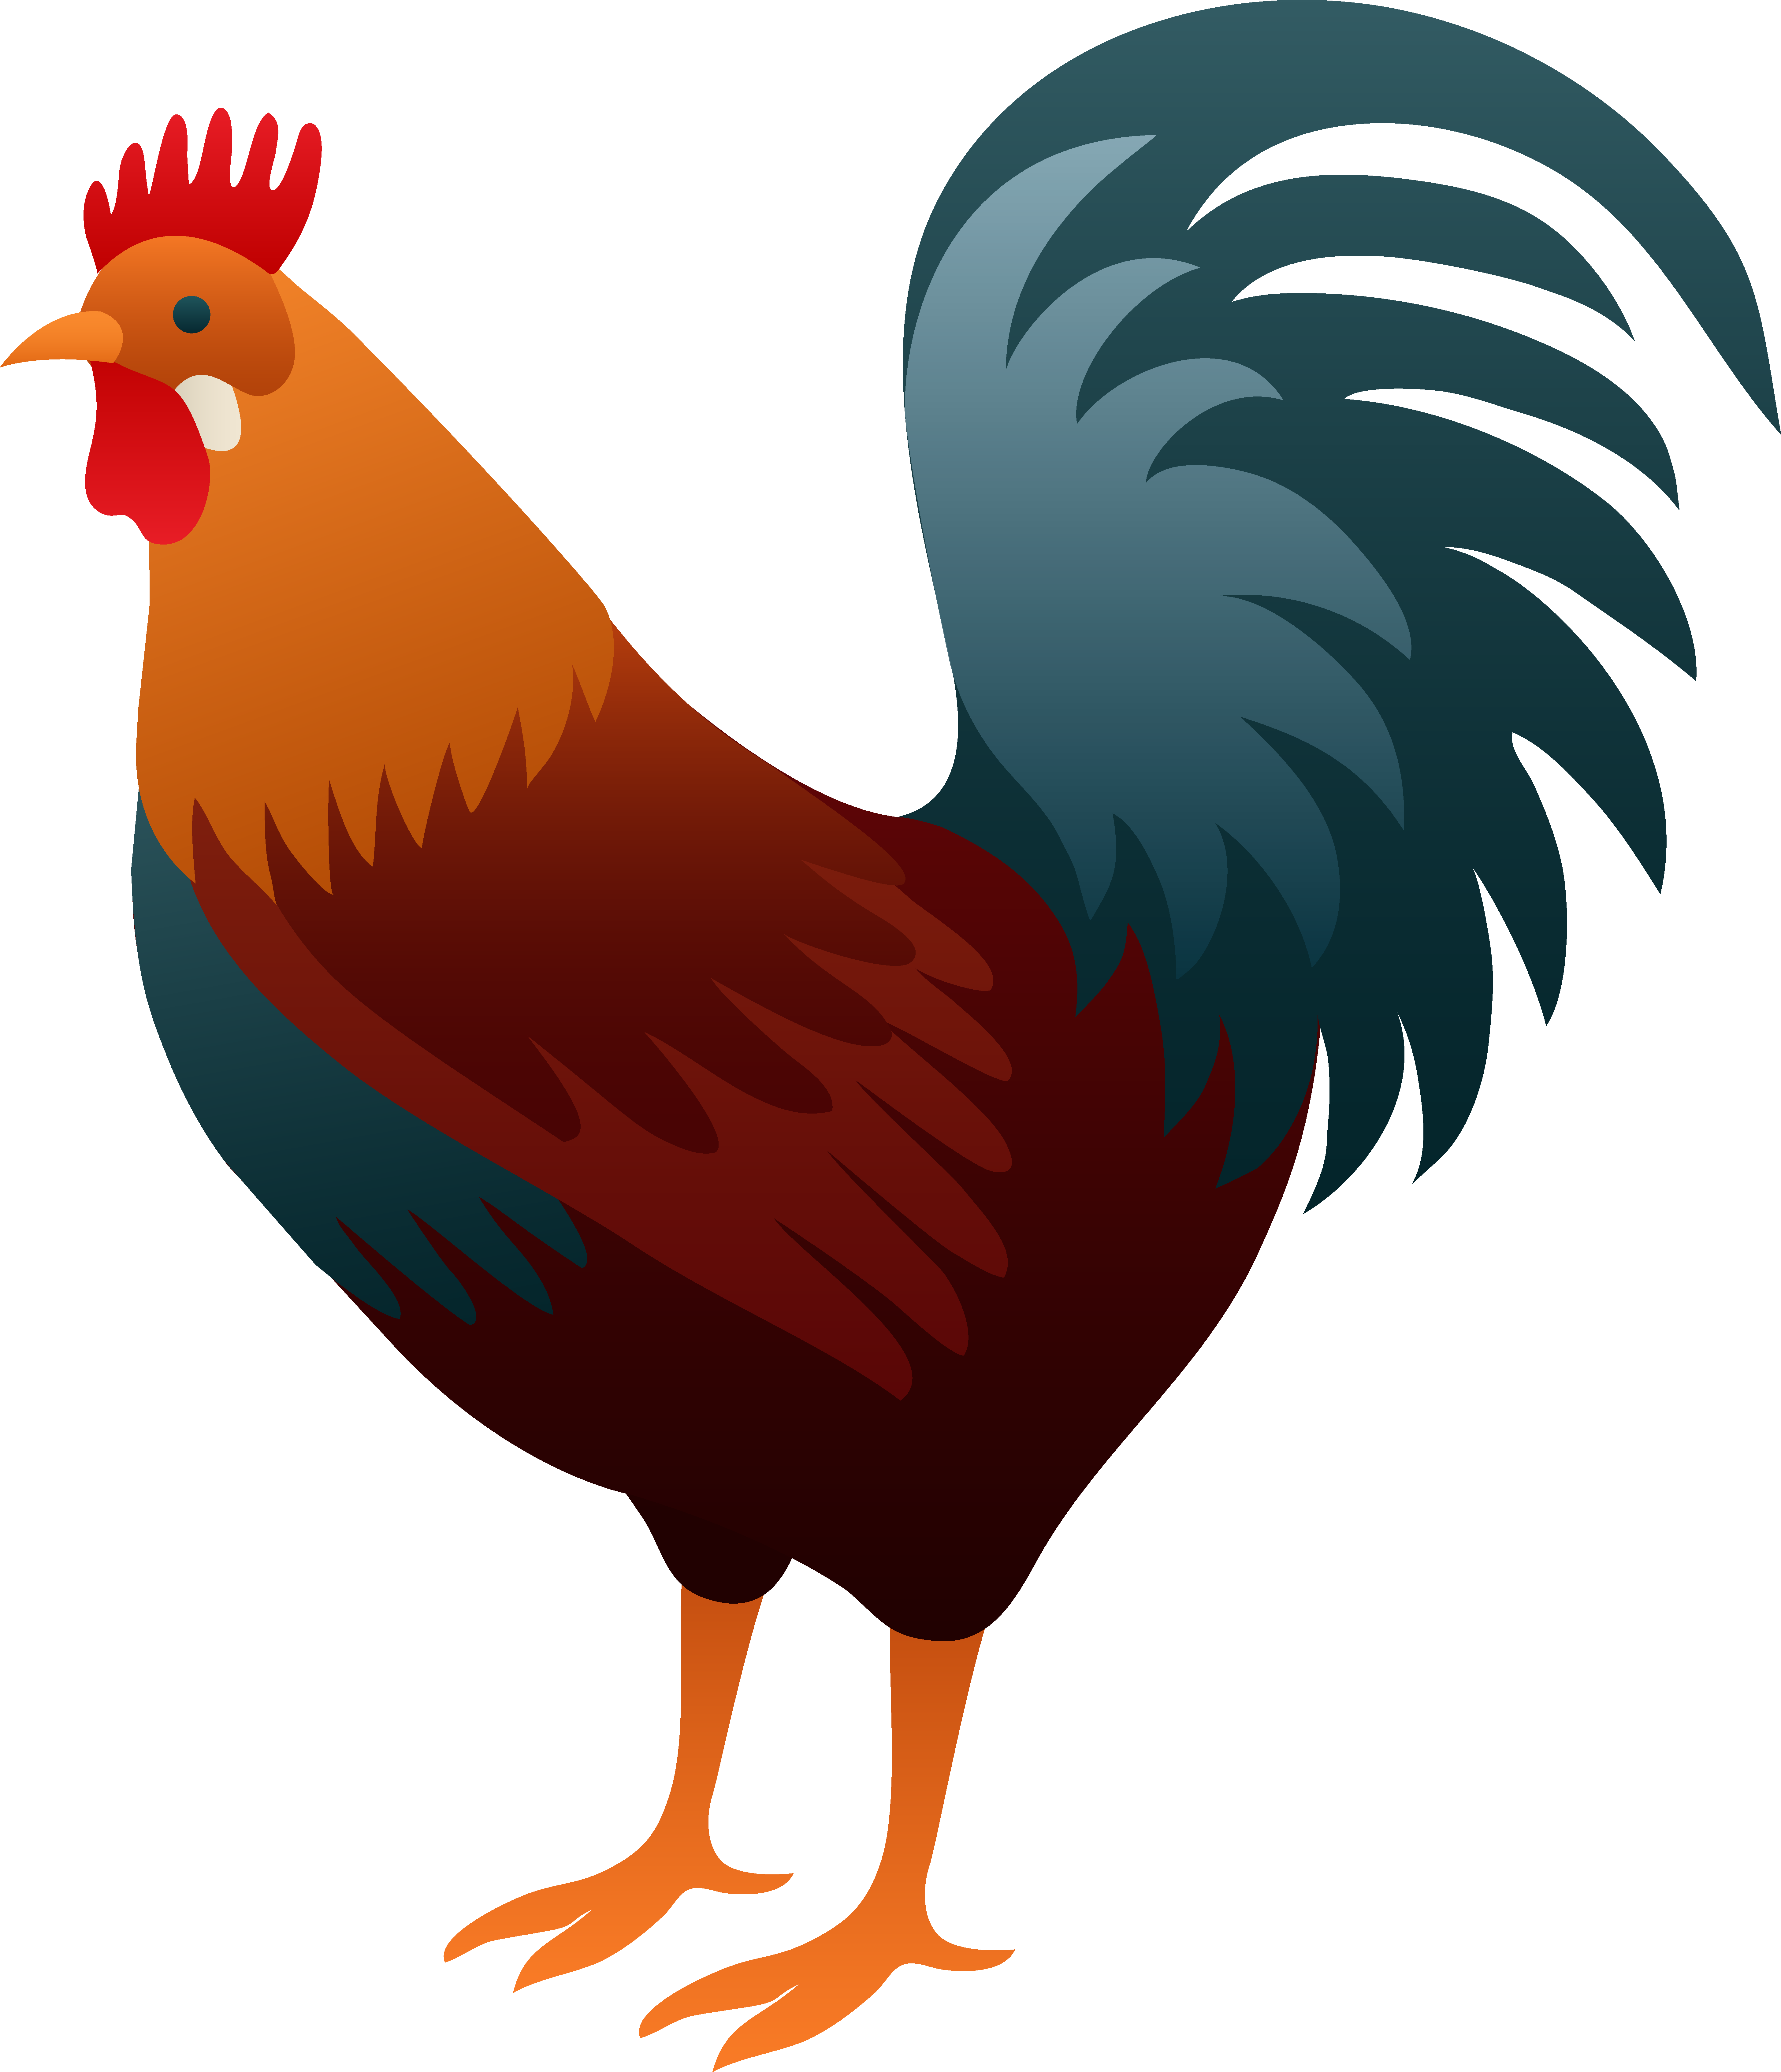 Rooster Clip Art Cartoon Free | Clipart Panda - Free Clipart Images